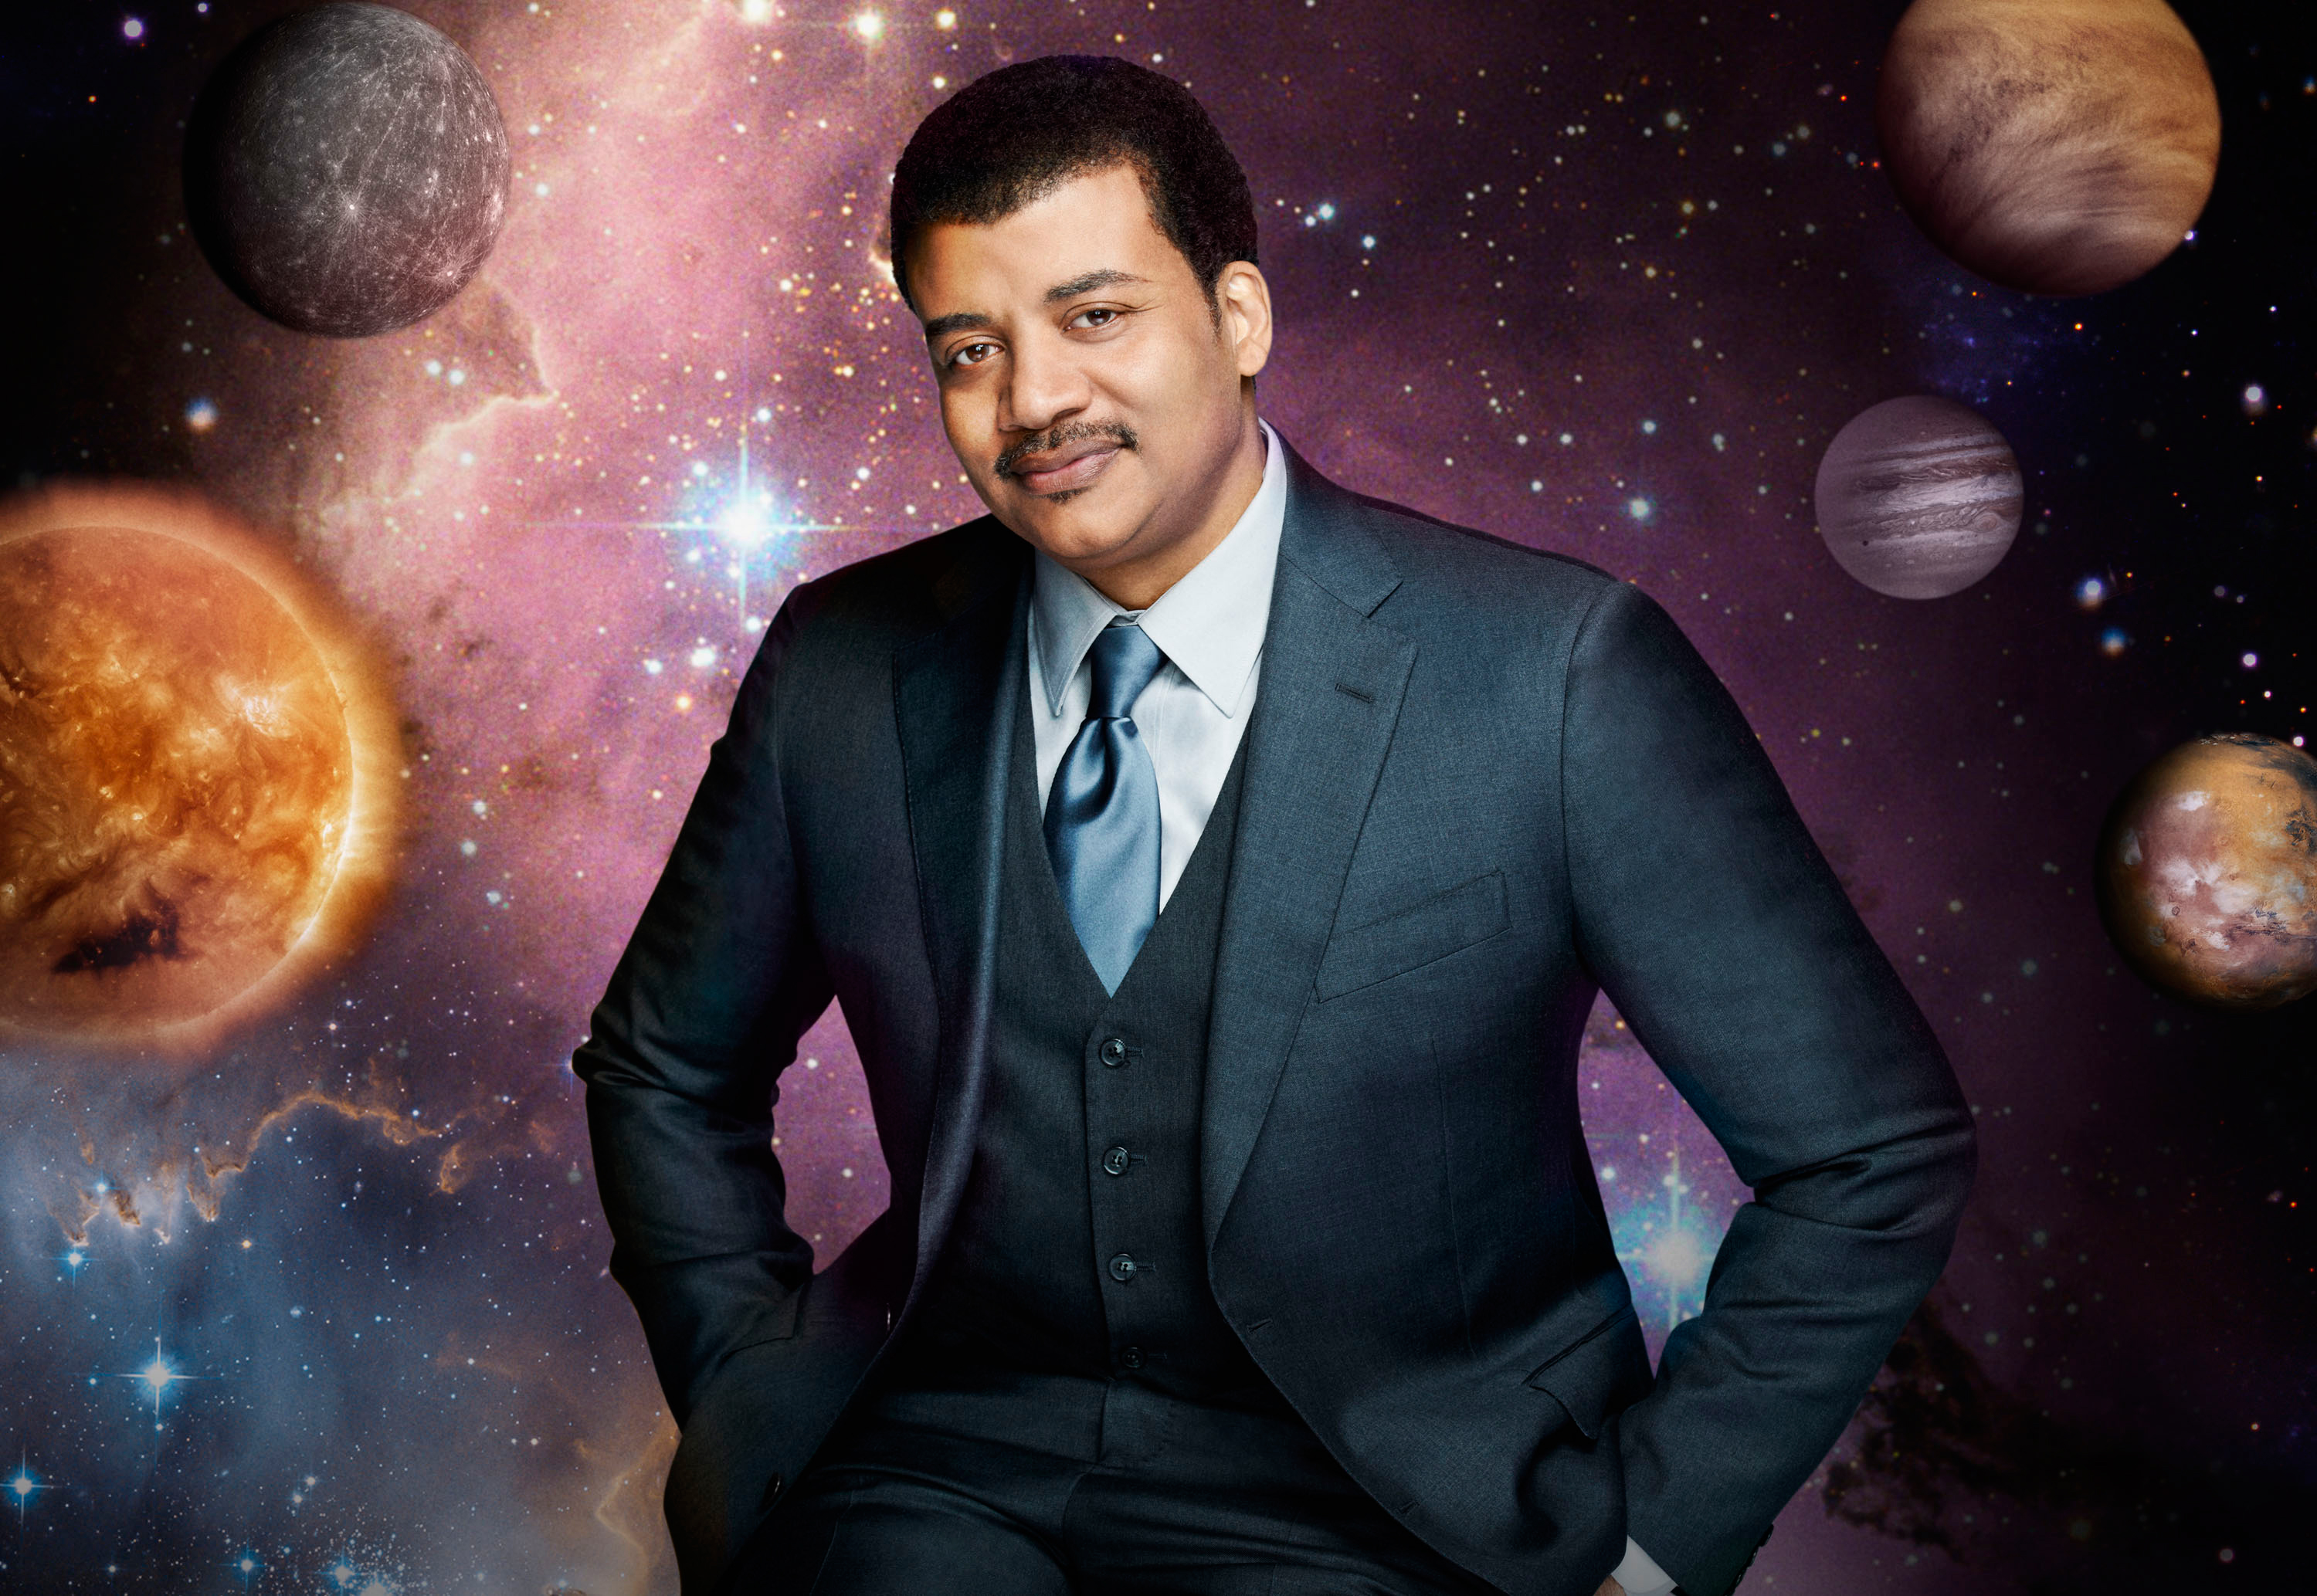 Neil deGrasse Tyson To Receive National Academy of Sciences' Highest Honor